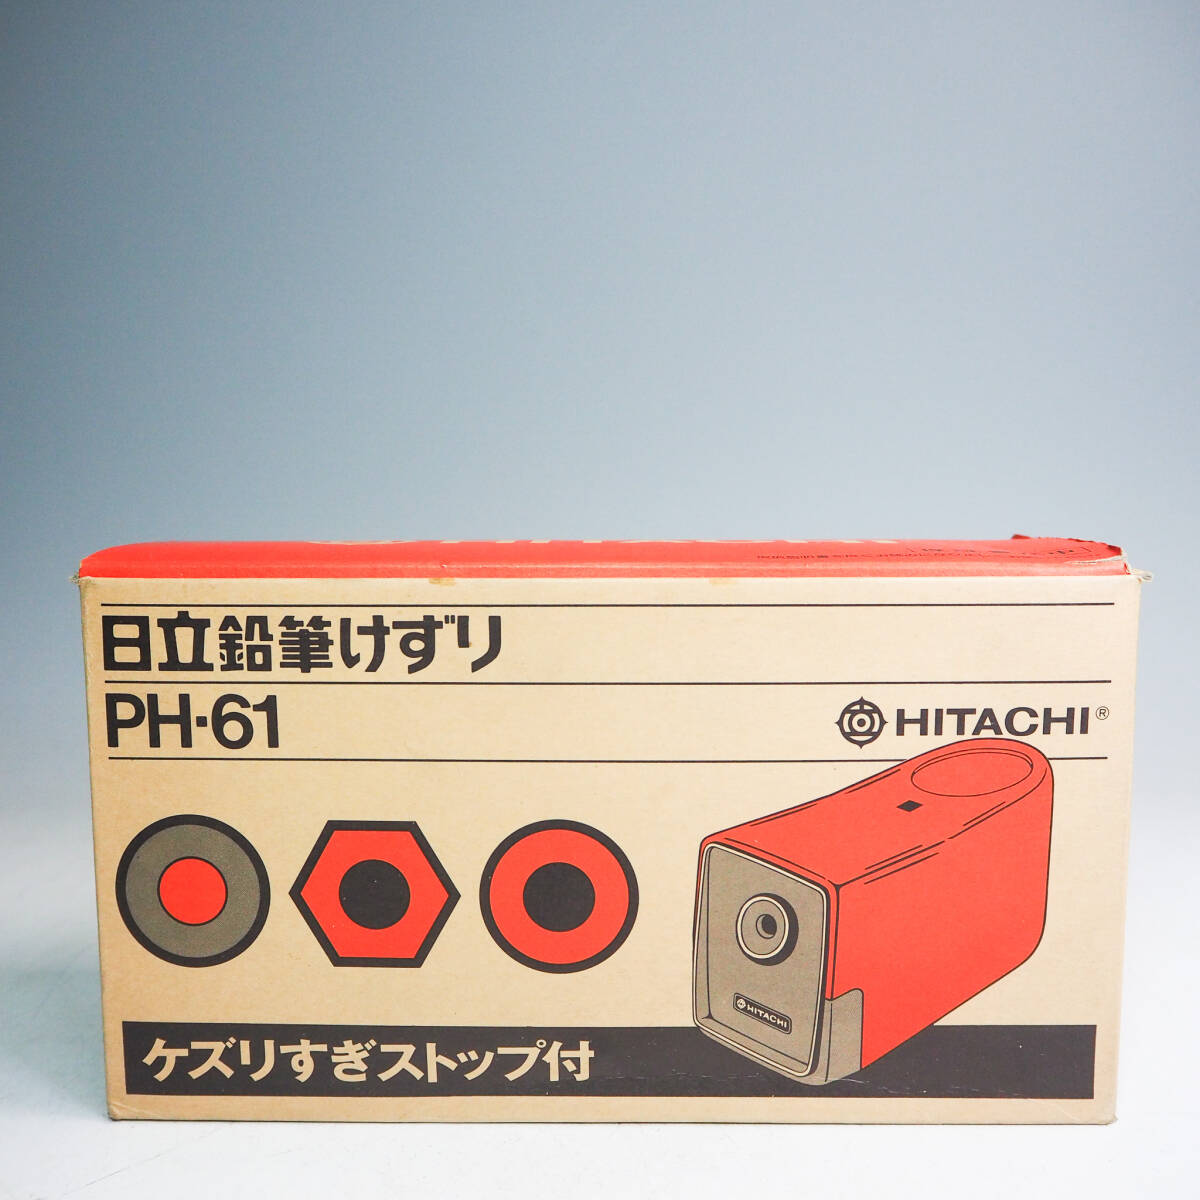  unused goods HITACHI Hitachi pencil ...PH-6 1 zli.. Stop attaching electric pencil sharpener machine stationery writing implements that time thing retro Vintage K5284